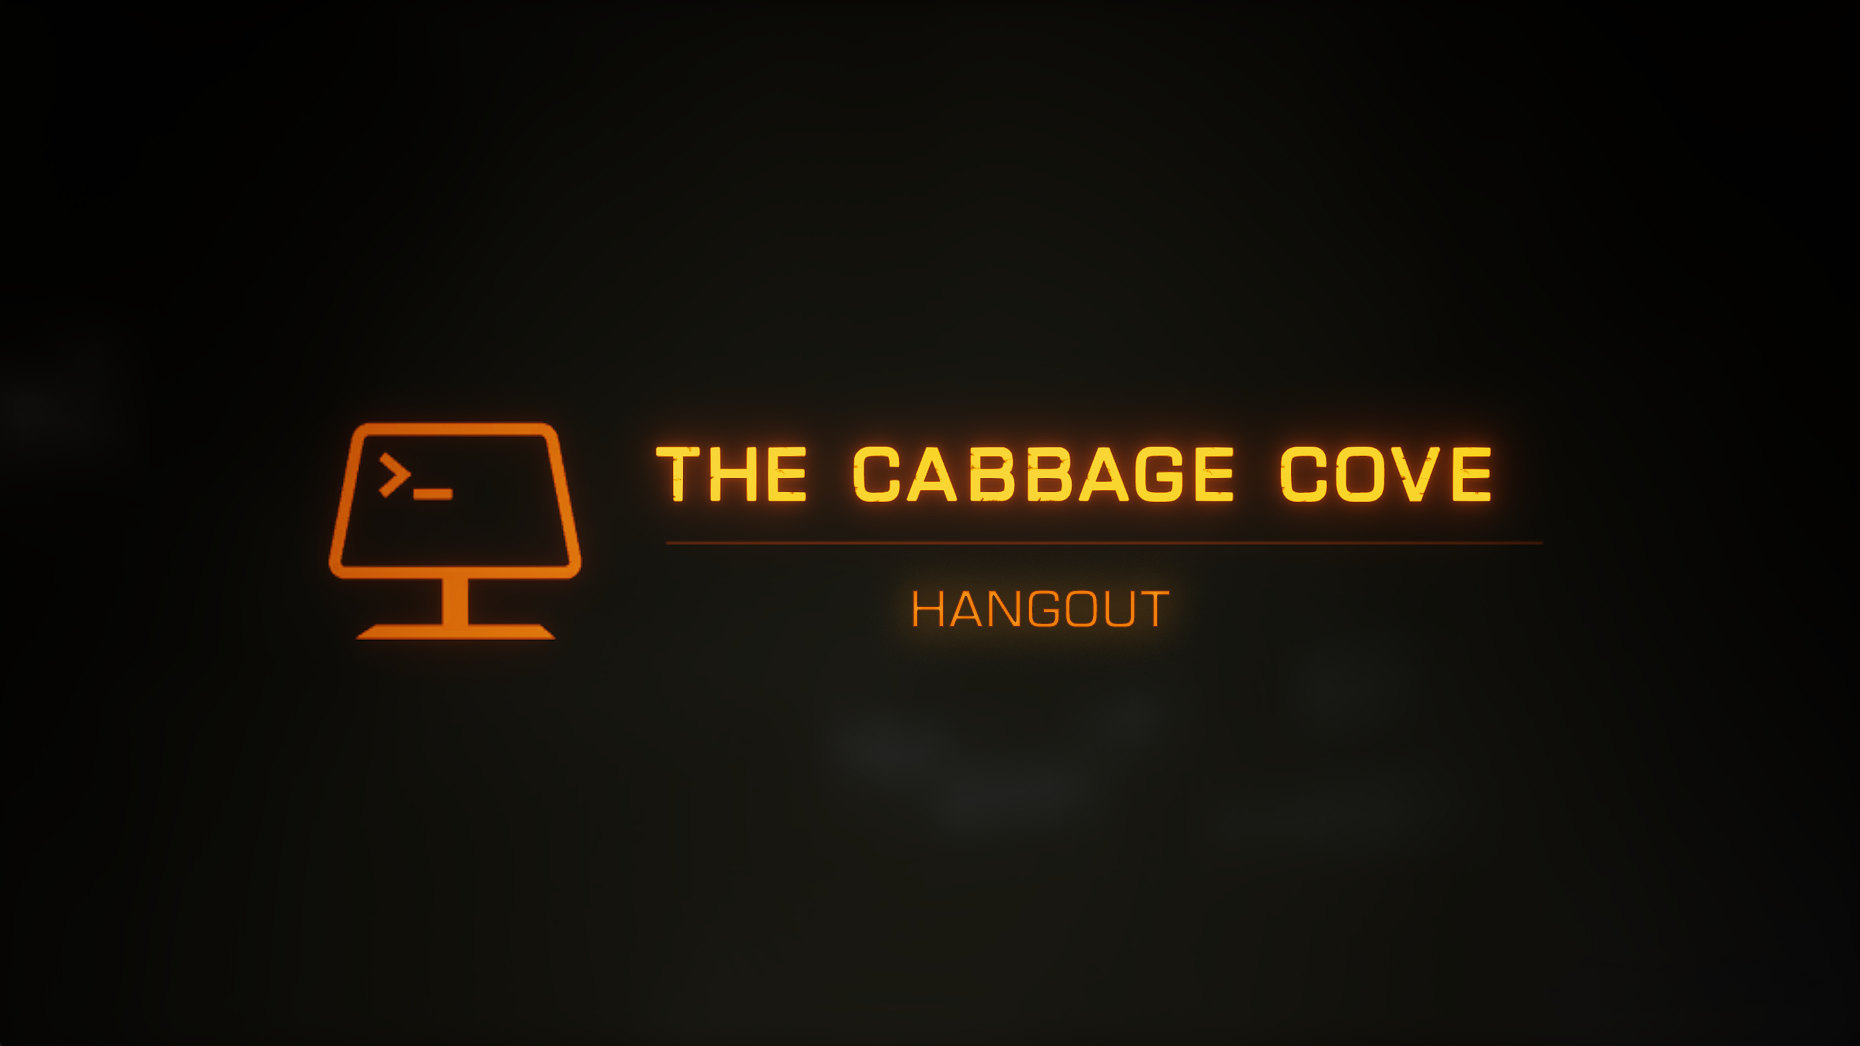 Cabbage Cove Hangout